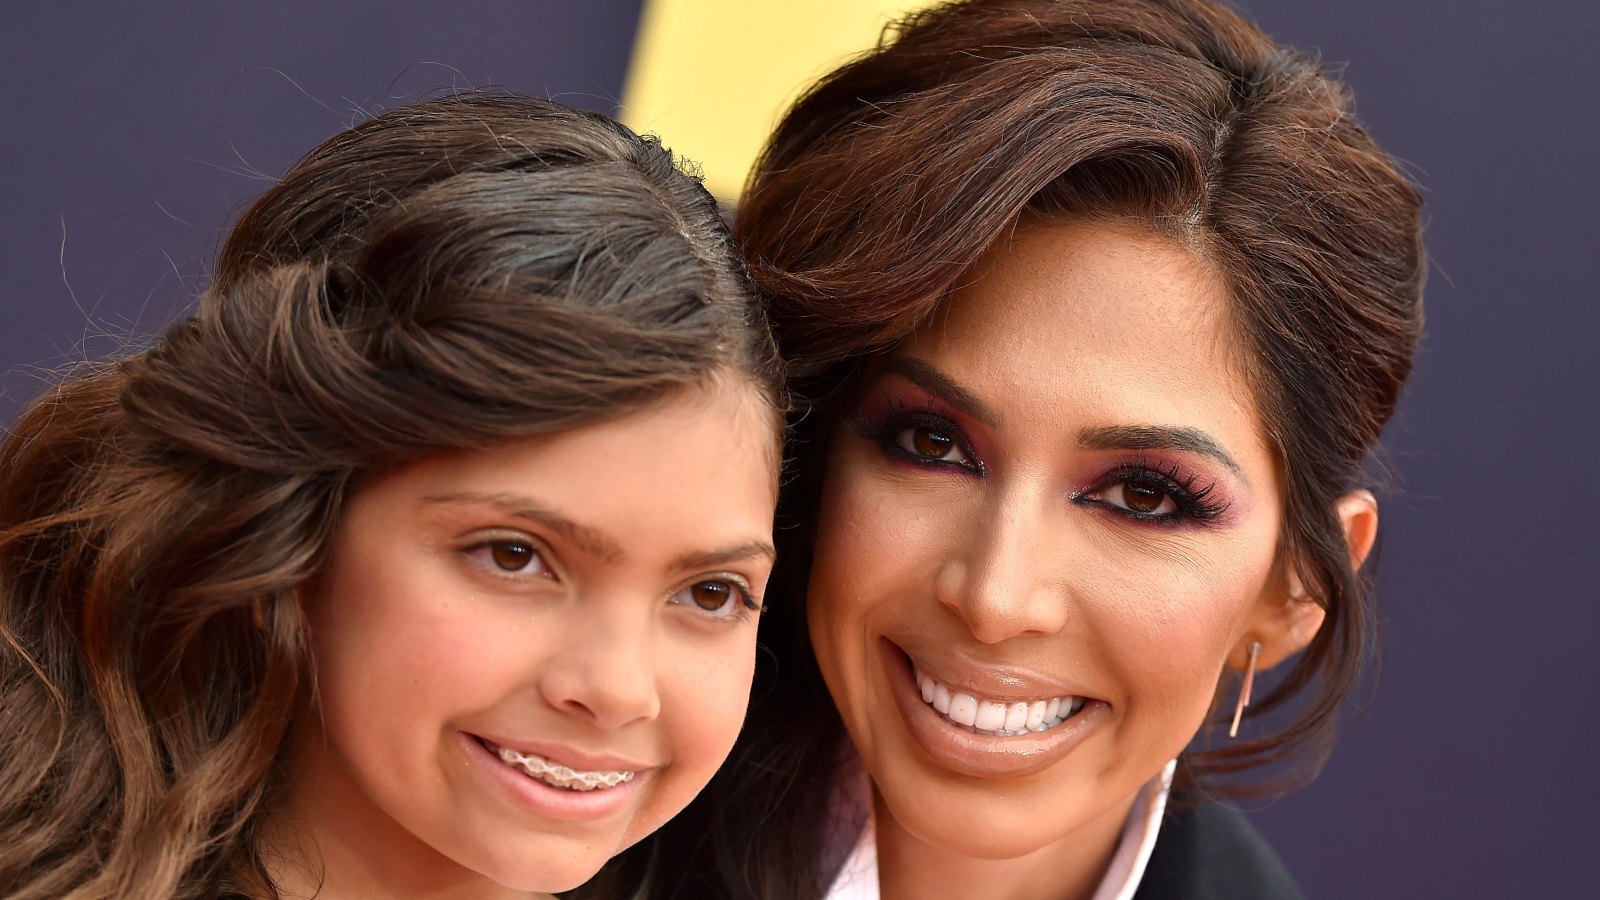 Farrah Abraham Defends Herself After Posting a Video of Daughter Sophia, 9, Dancing in Her Underwear